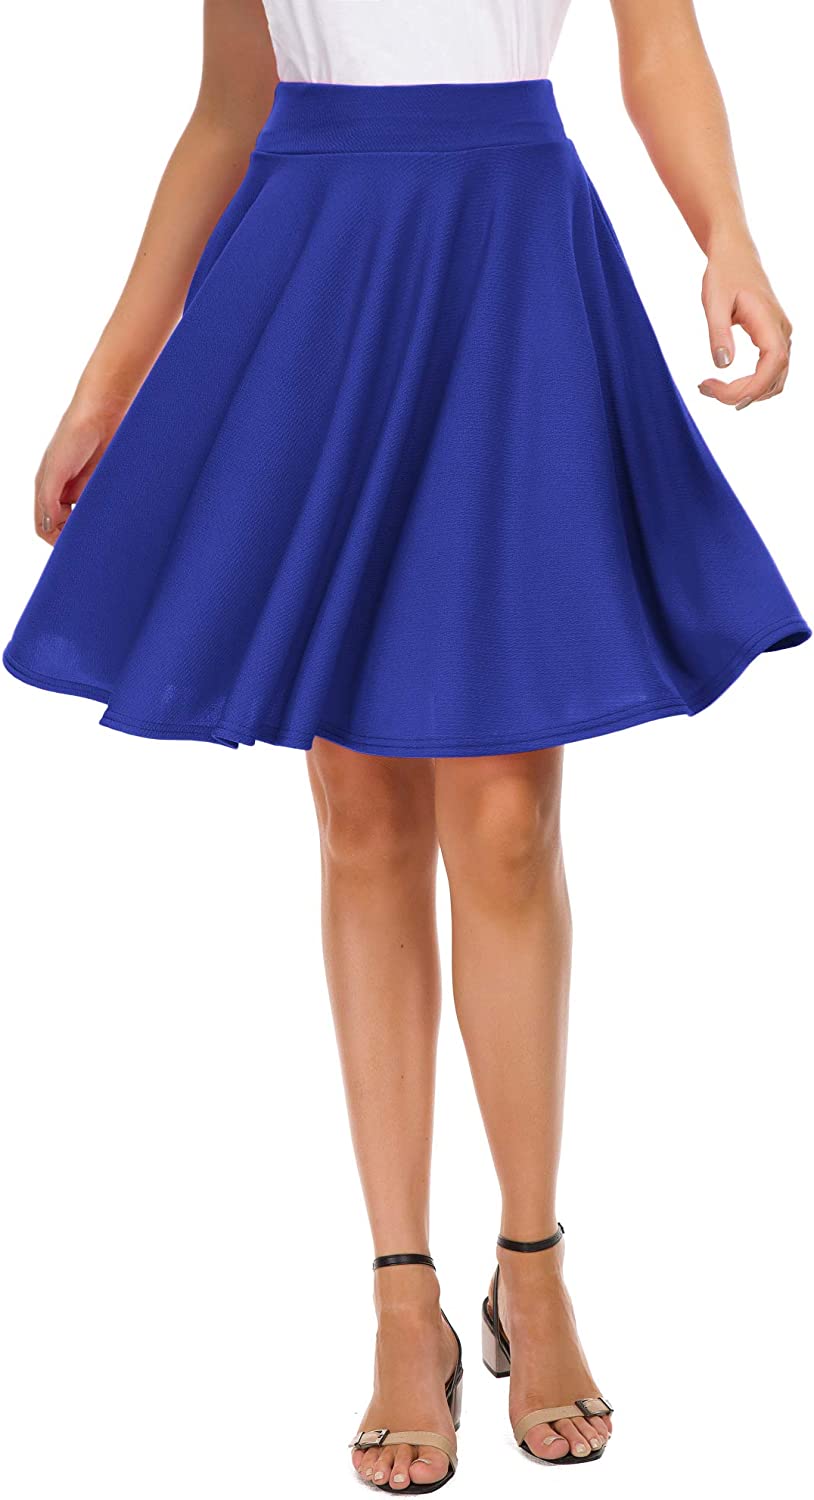 EXCHIC Women's Casual Stretchy Flared Mini Skater Skirt Basic A-Line ...